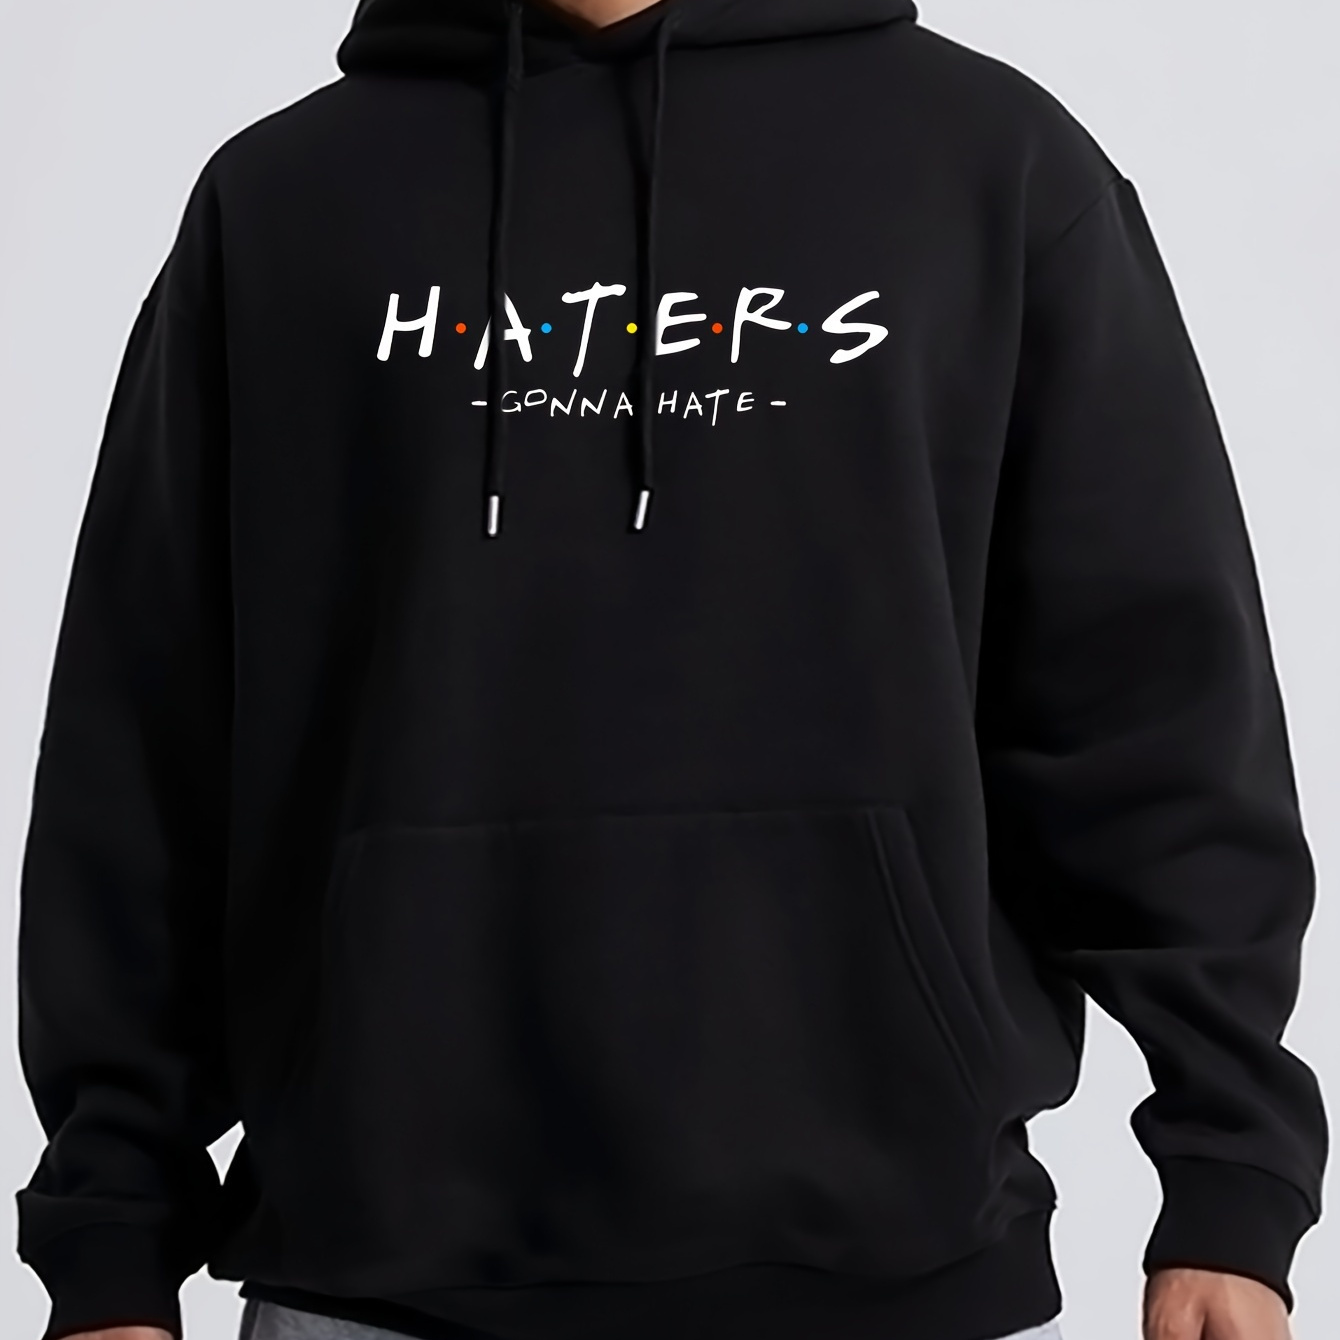 

Haters Gonna Hate Print Men's Pullover Round Neck Hoodies With Kangaroo Pocket Long Sleeve Hooded Sweatshirt Loose Casual Top For Autumn Winter Men's Clothing As Gifts